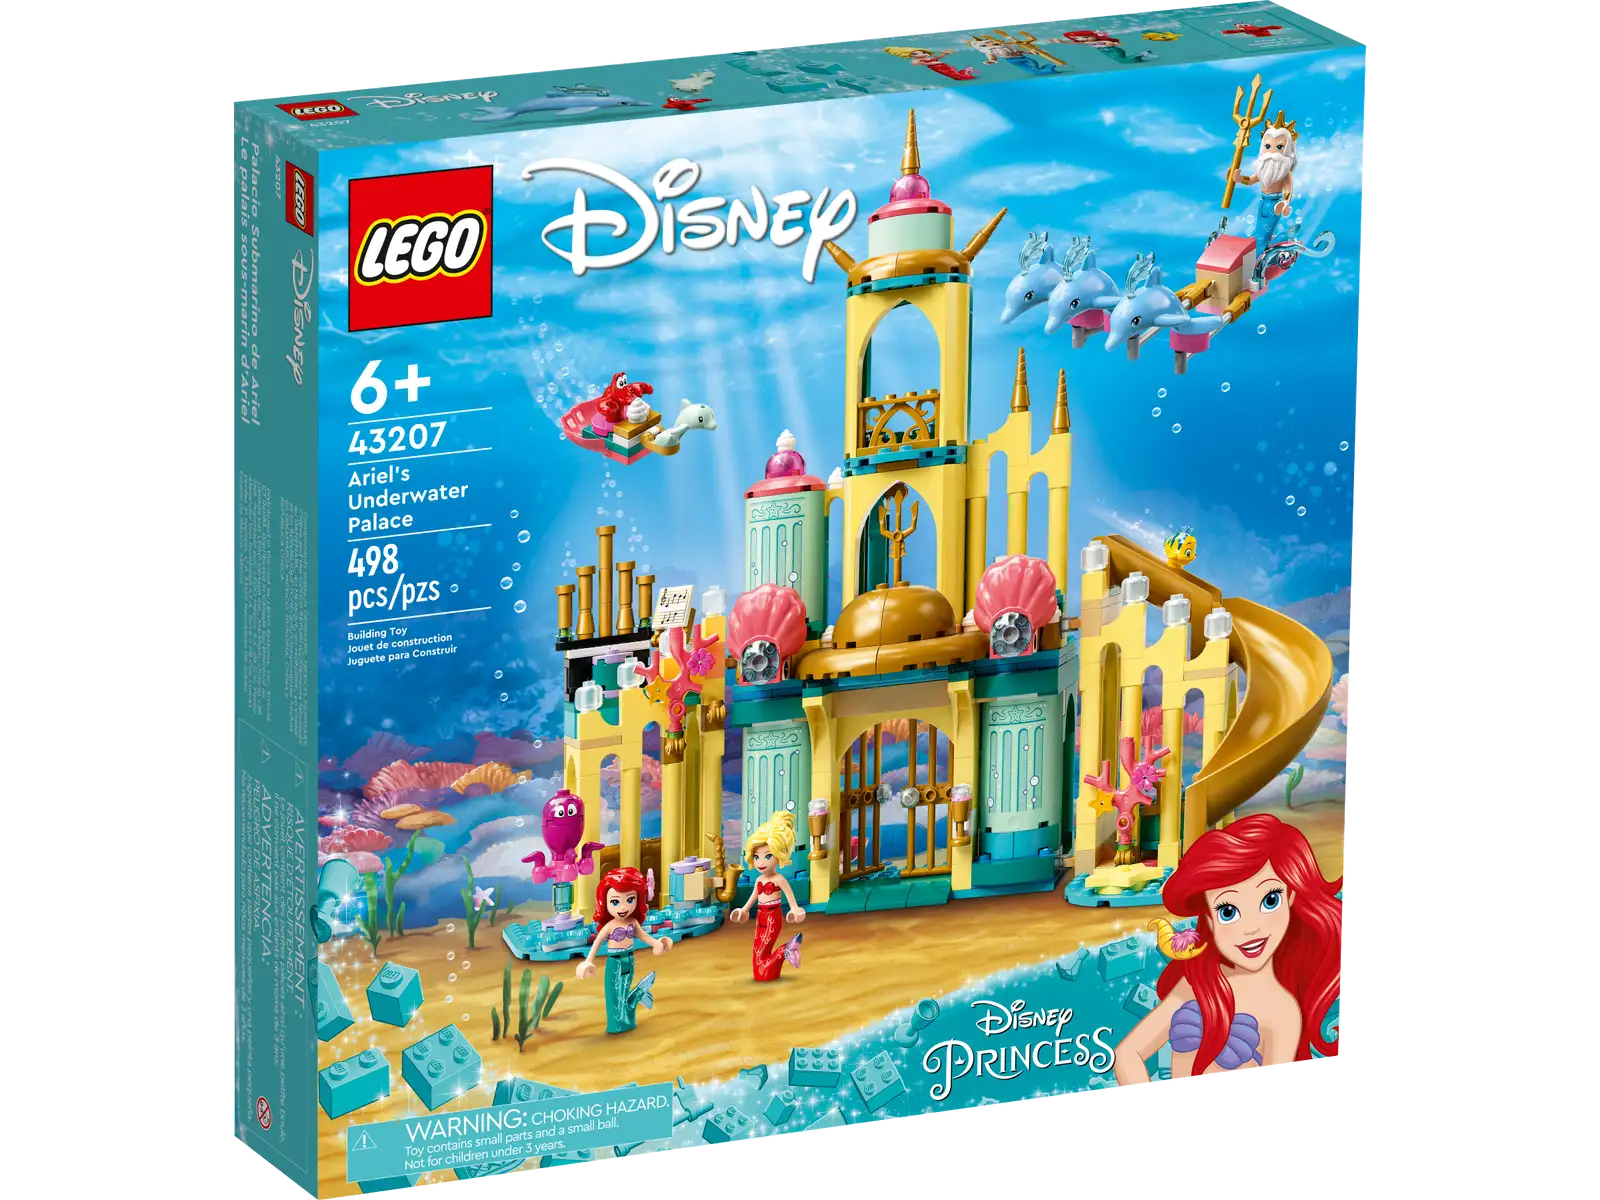 Adventures beneath the sea await Disney's The Little Mermaid fans aged 6 and up in this LEGO® ǀ Disney Ariel's Underwater Palace (43207) set, featuring a buildable toy palace, 3 mini-doll figures and 6 LEGO animal figures, plus interactive digital building instructions to help make construction extra fun. Available in the free LEGO Building Instructions app, the intuitive tools help kids visualize the model as they build. Hands-on play, learning and growth This detailed Disney palace set ispacked with features and accessories to spark imagination and creativity while kids role-play and relive favorite movie scenes or create their own. This set encourages both solo and group play, with the different ages of the characters letting kids act out stories as a family. Iconic characters This set gets kids playing fast with Disney's Ariel, Arista and King Triton mini-doll figures, plus Sebastian, Flounder and 4 dolphin LEGO figures, and makes an impressive gift for any Disney Princess fan. Creative play – Give any Disney fan a gift full of features, functions and accessories to inspire imaginative role play with this fun LEGO® ǀ Disney Ariel's Underwater Palace (43207) set What's in the box? – This 498-piece set features a palace with a slide, movable furniture and large and small dolphin chariots, plus plenty of accessories to spark extended play sessions Iconic characters – Featuring Disney's Ariel, Arista and King Triton mini-doll figures, plus Sebastian and Flounder LEGO® figures, this set is designed for endless imaginative adventures Fun gift for ages 6+ – Kids will love this high-quality set full of hands-on play possibilities. Based on a beloved Disney movie, this buildable toy kit will really impress a Disney Princess fan Details to spark play – With the palace measuring over 11 in. (28 cm) high, 12.5 in. (31 cm) wide and 5 in. (12 cm) deep, this set is designed for extended play sessions and looks great on display Interactive digital building – Using the LEGO® Building Instructions app, builders can zoom, rotate and visualize a digital version of their model as they build Important life skills – With detailed mini-doll figures and a recognizable build, this Disney Princess construction set encourages open creative play that helps build vital life skills through fun Uncompromising quality – Ever since 1958, LEGO® components have met stringent industry standards to ensure they connect consistently Safety first – LEGO® components are dropped, heated, crushed, twisted and analyzed to make sure they meet rigorous global safety standards